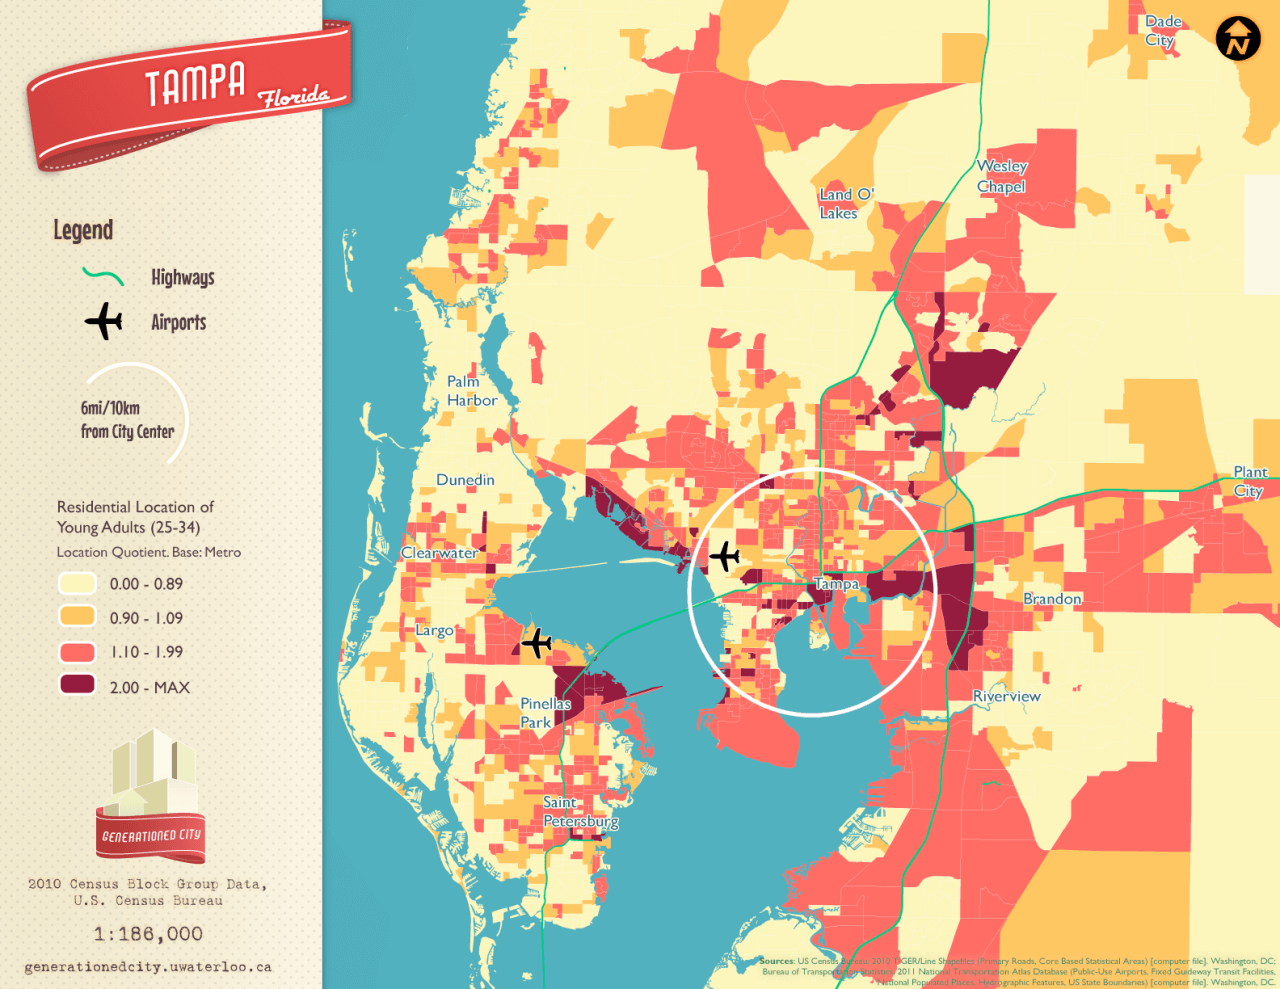 Residential location of young adults in Tampa.